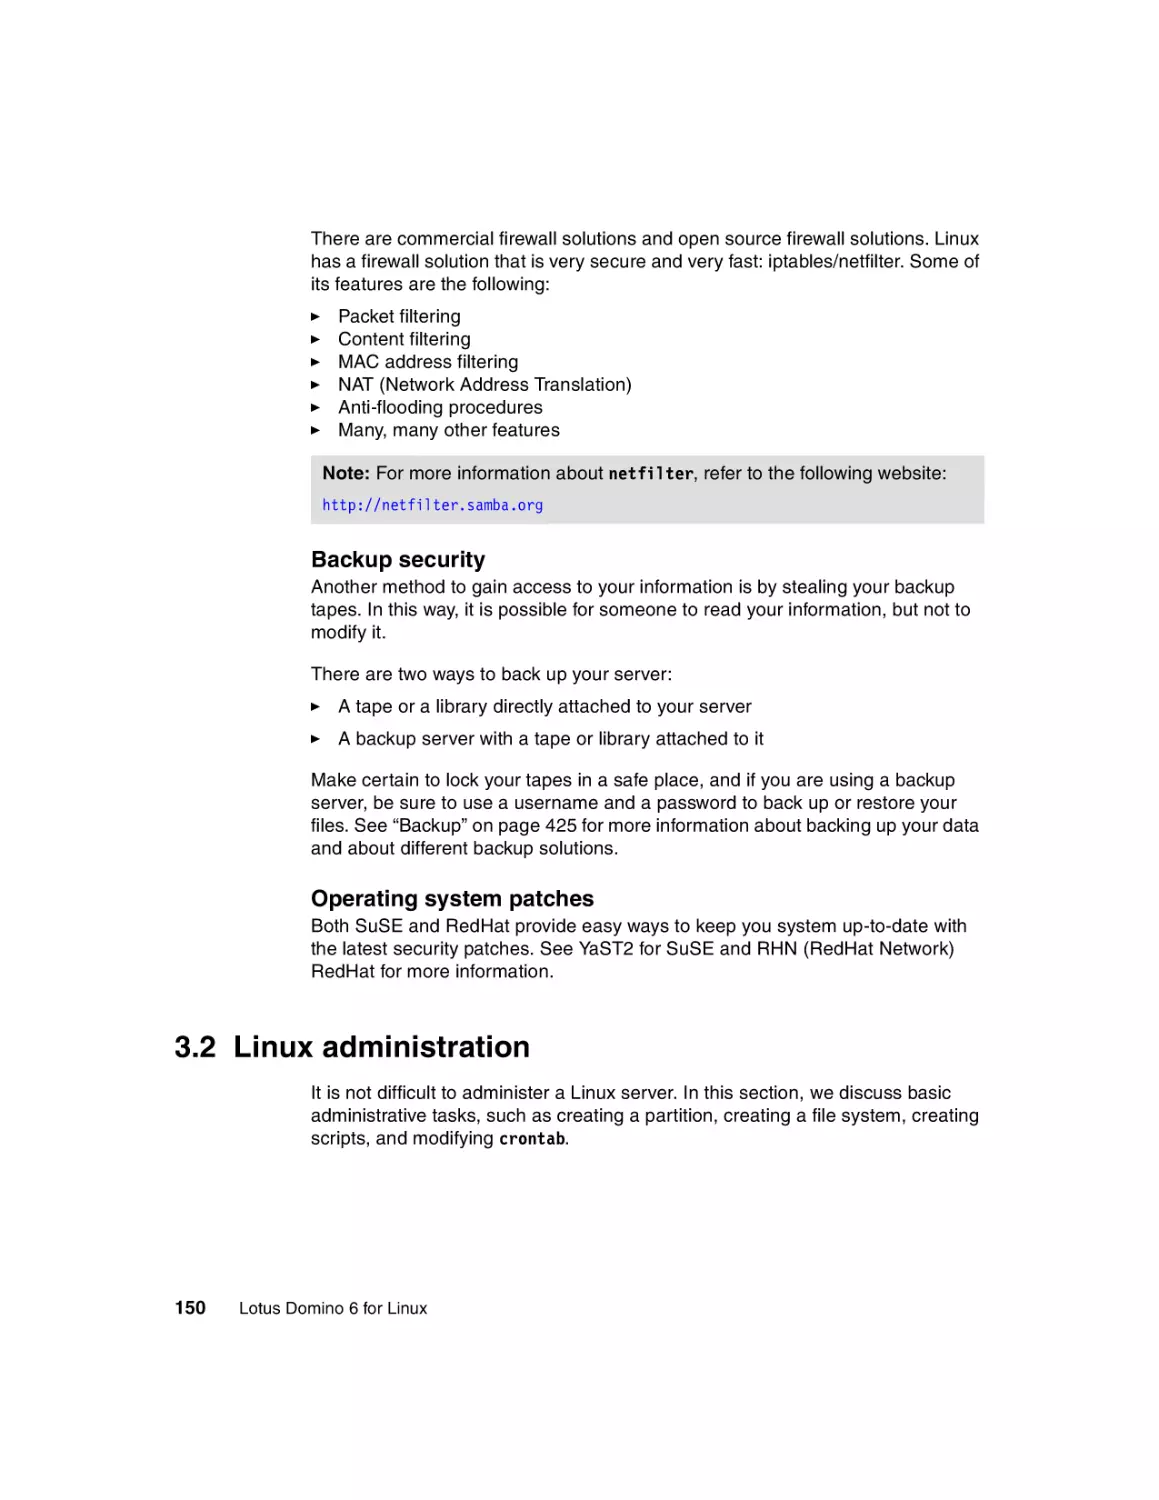 3.2 Linux administration